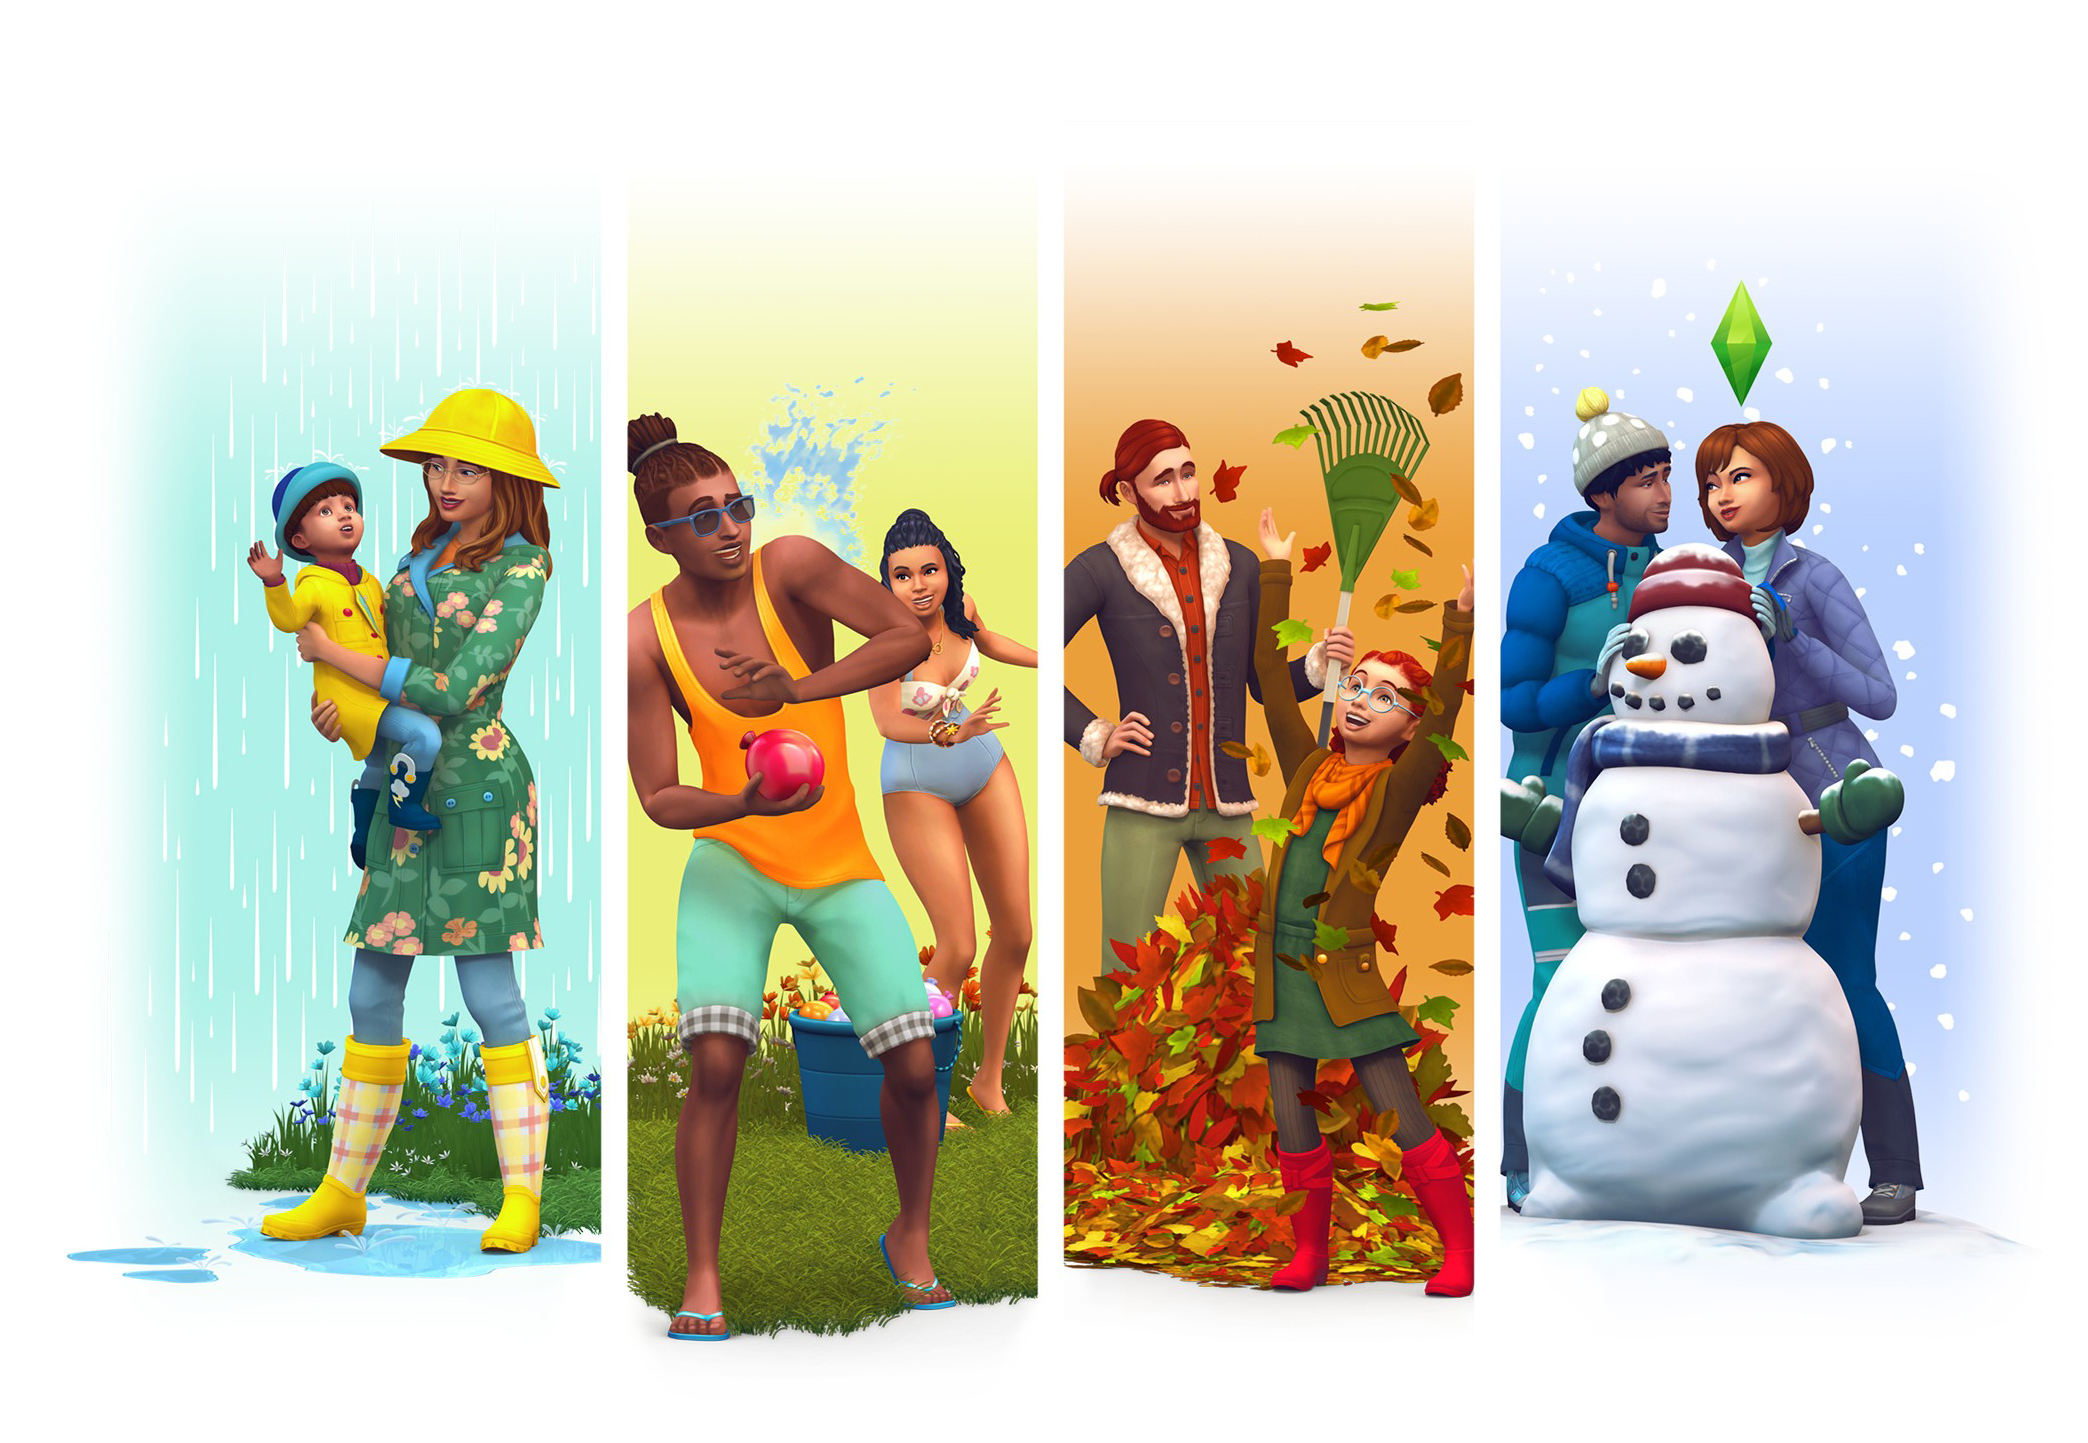 the sims 4 packs